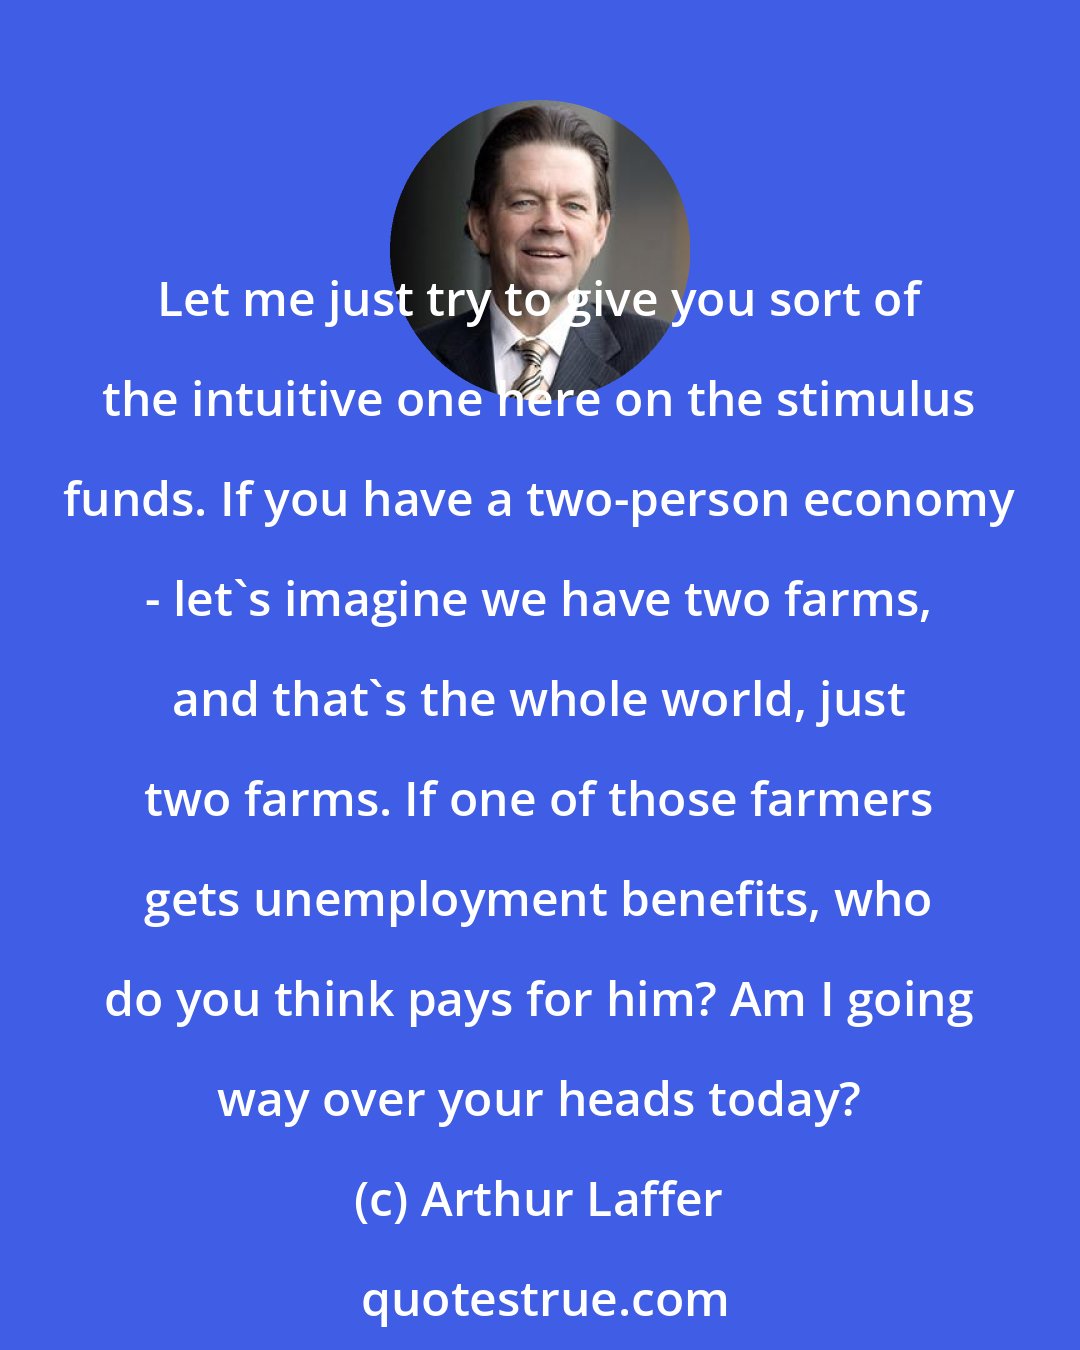 Arthur Laffer: Let me just try to give you sort of the intuitive one here on the stimulus funds. If you have a two-person economy - let's imagine we have two farms, and that's the whole world, just two farms. If one of those farmers gets unemployment benefits, who do you think pays for him? Am I going way over your heads today?